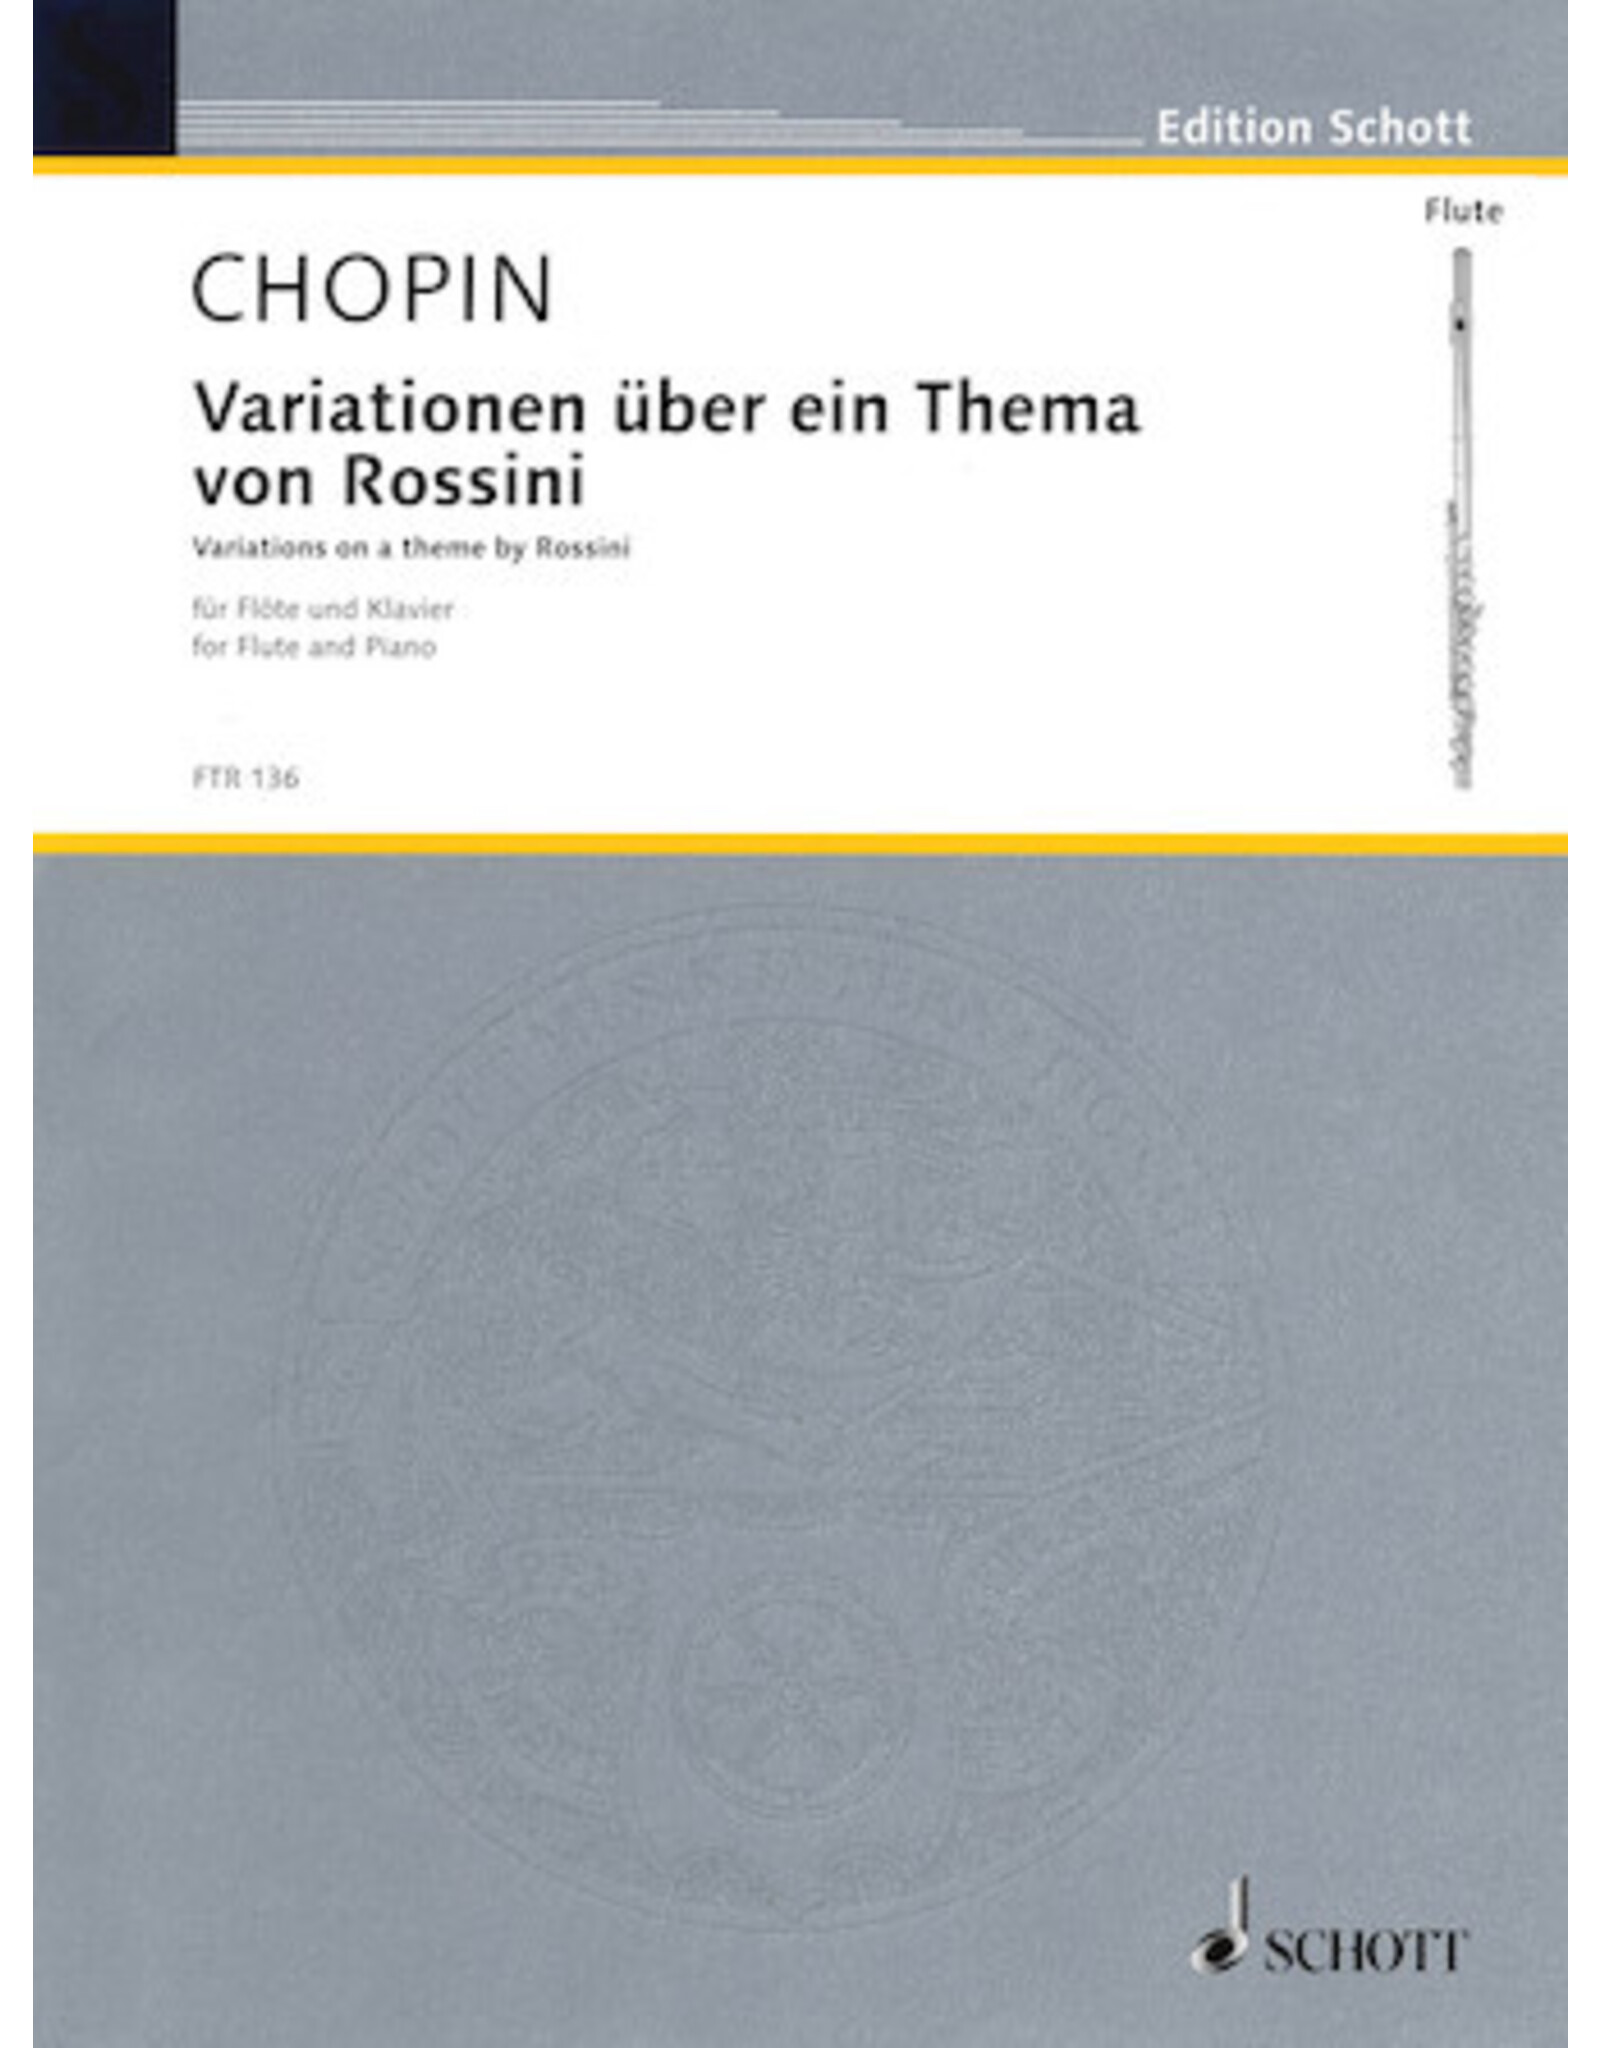 Schott Chopin - Variations on a Theme by Rossini from the Opera La Cenerantola